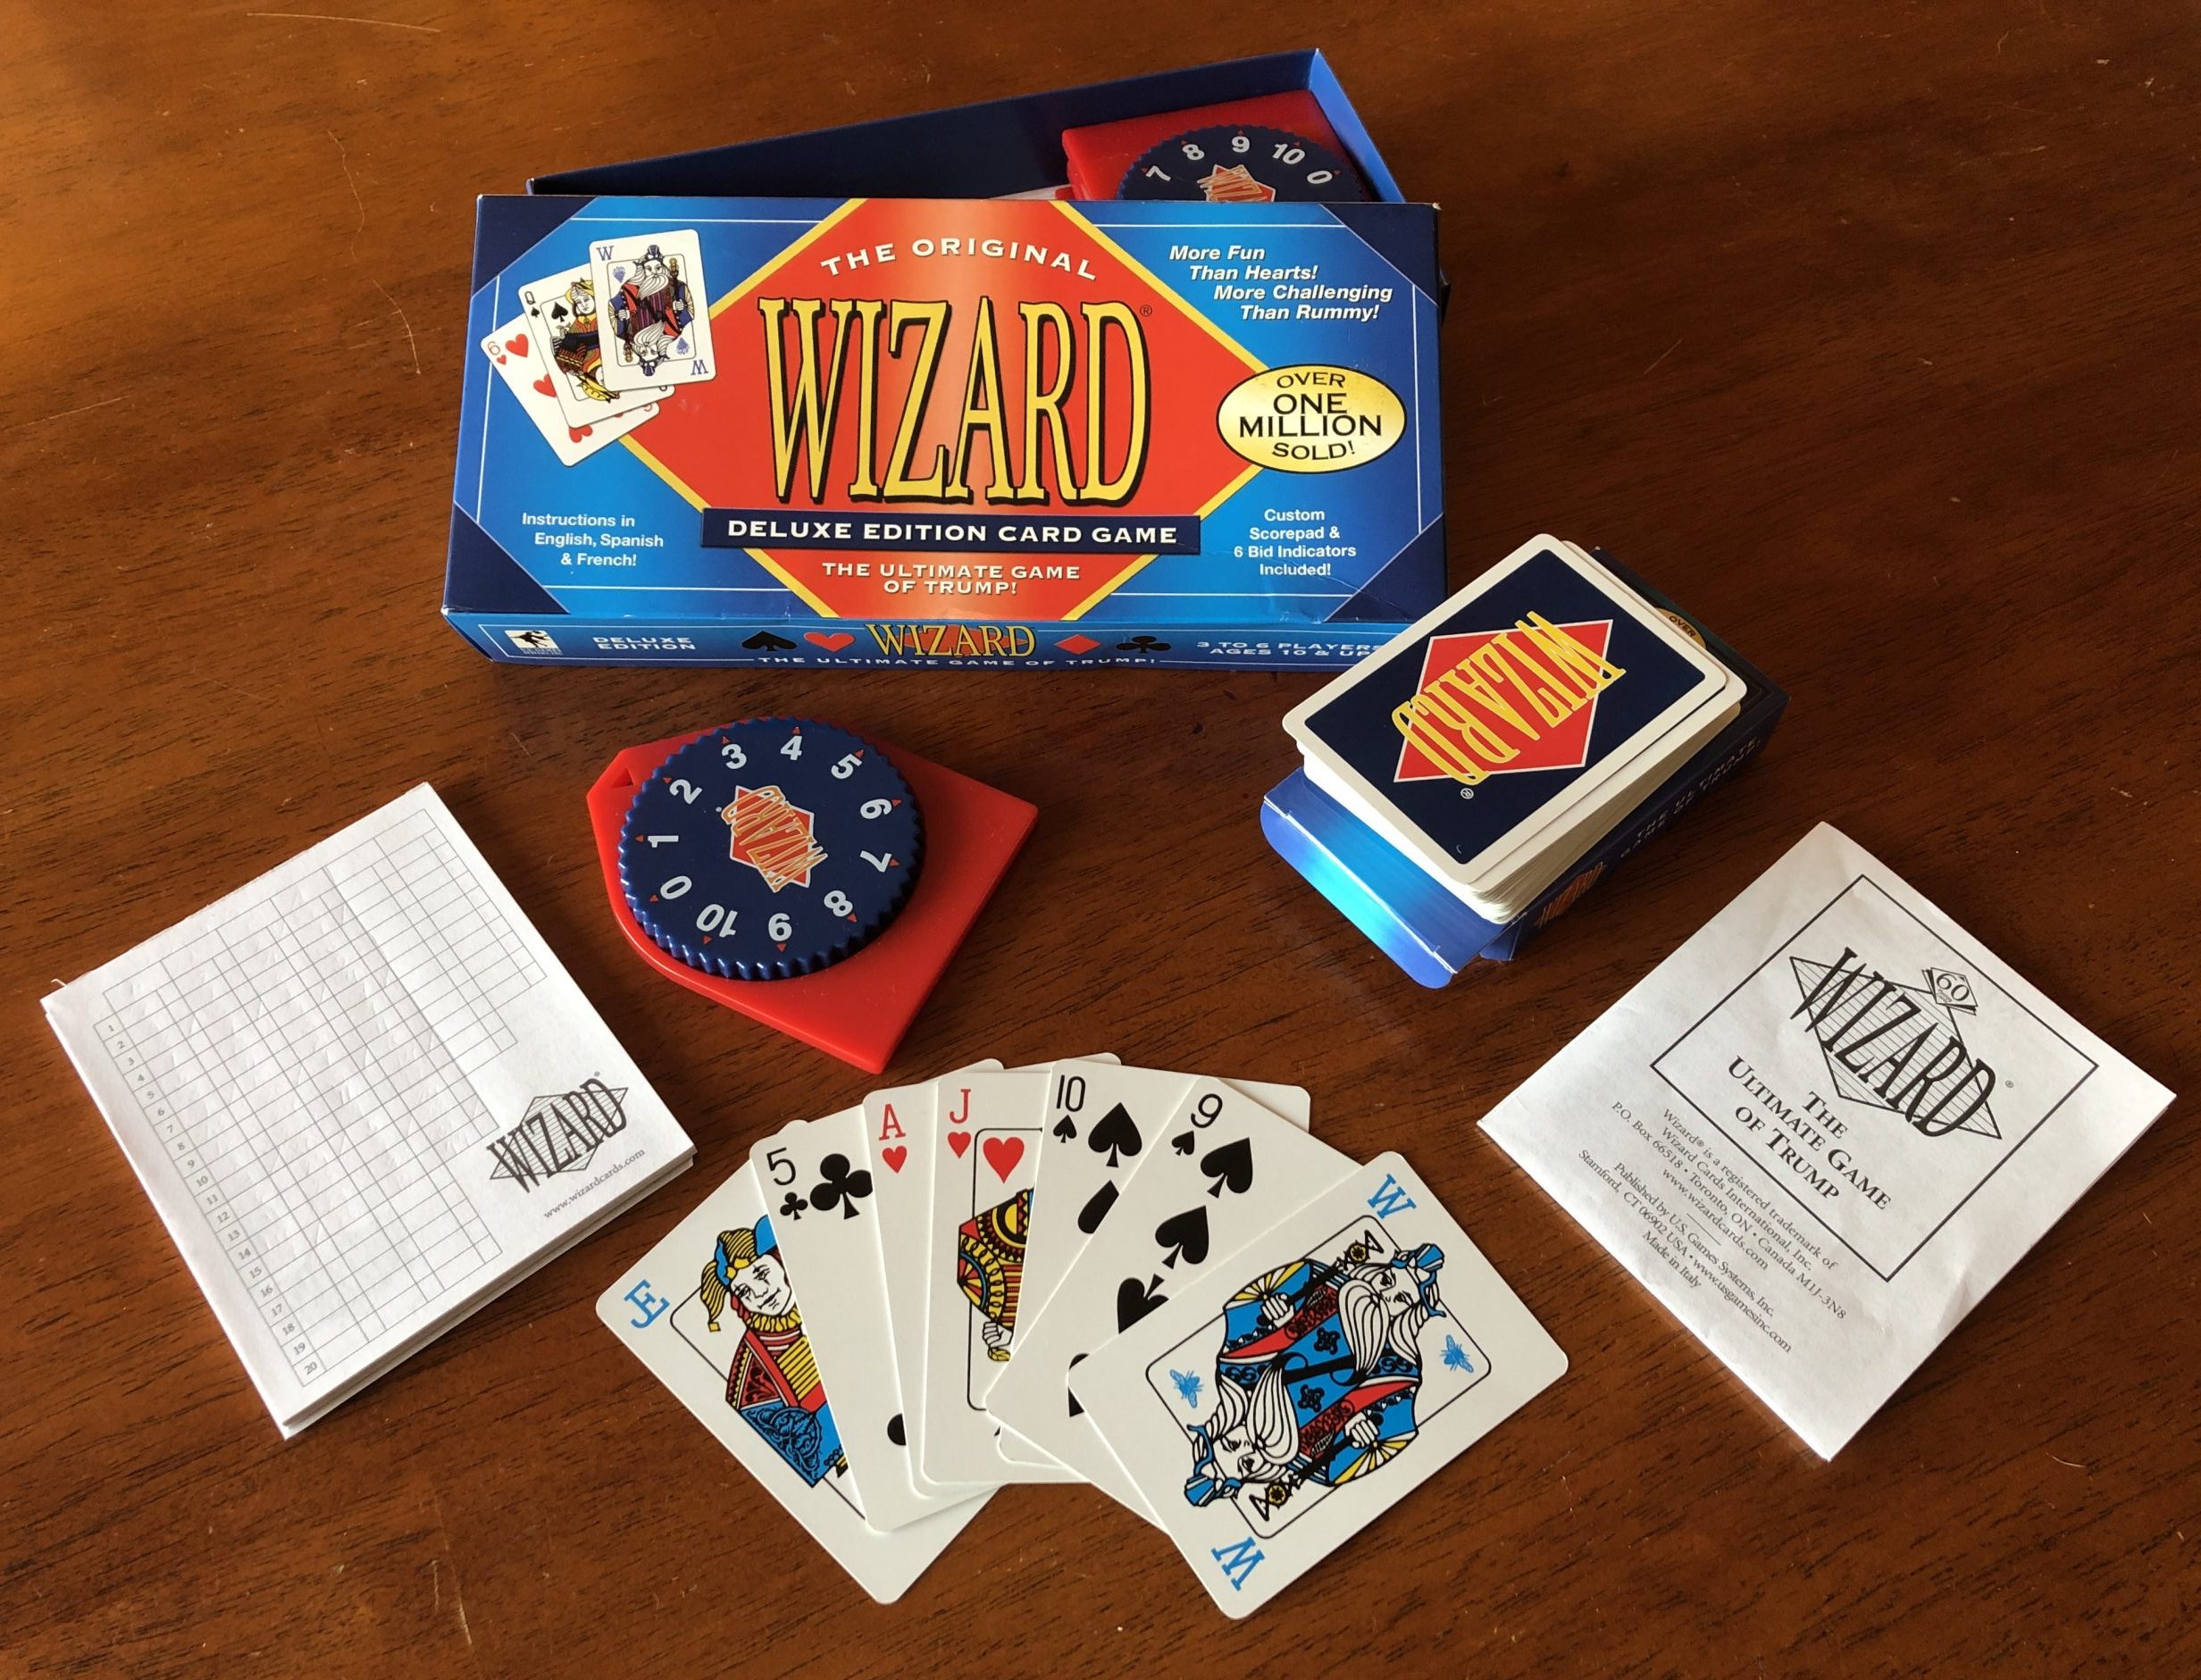 Wizard card game Deluxe version and its components